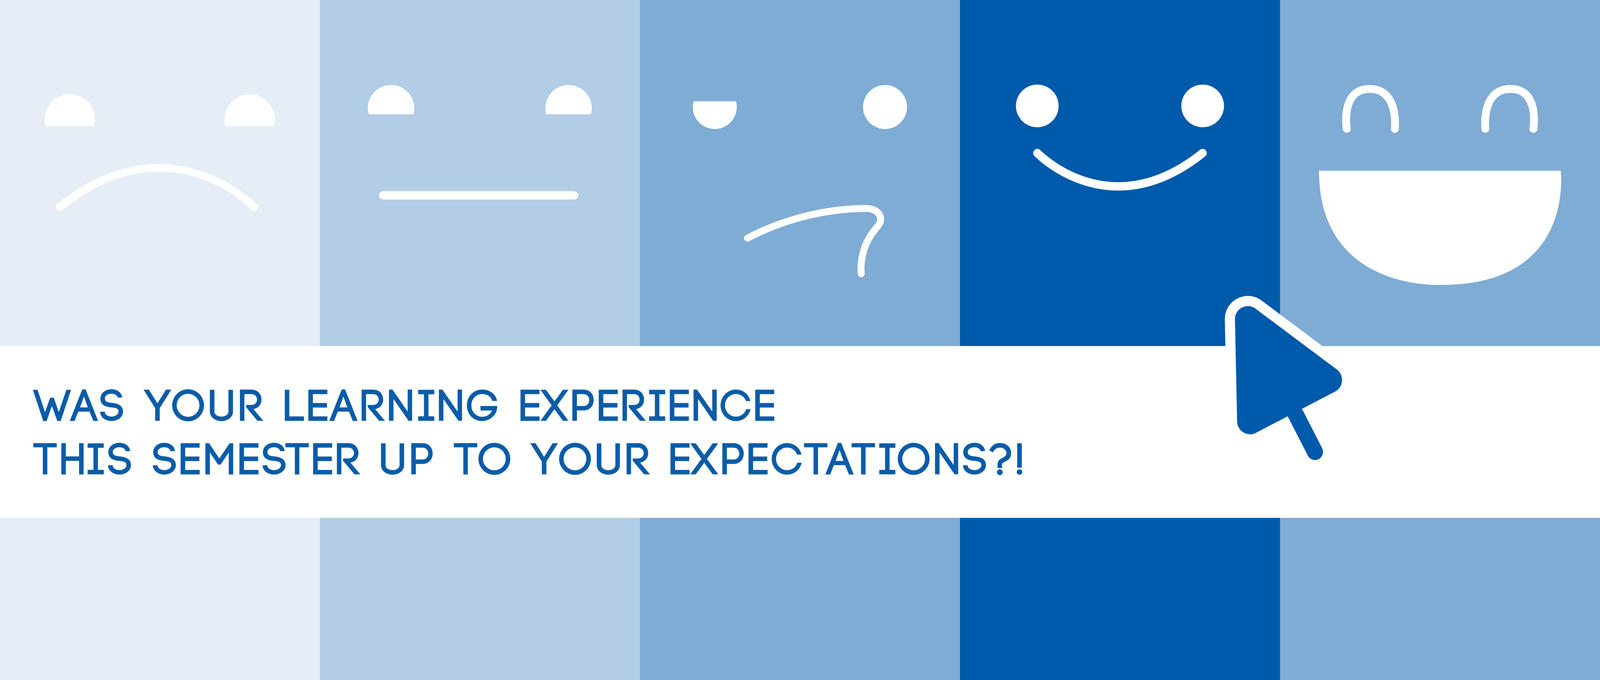 Was your learning experience this semester up to your expectations?